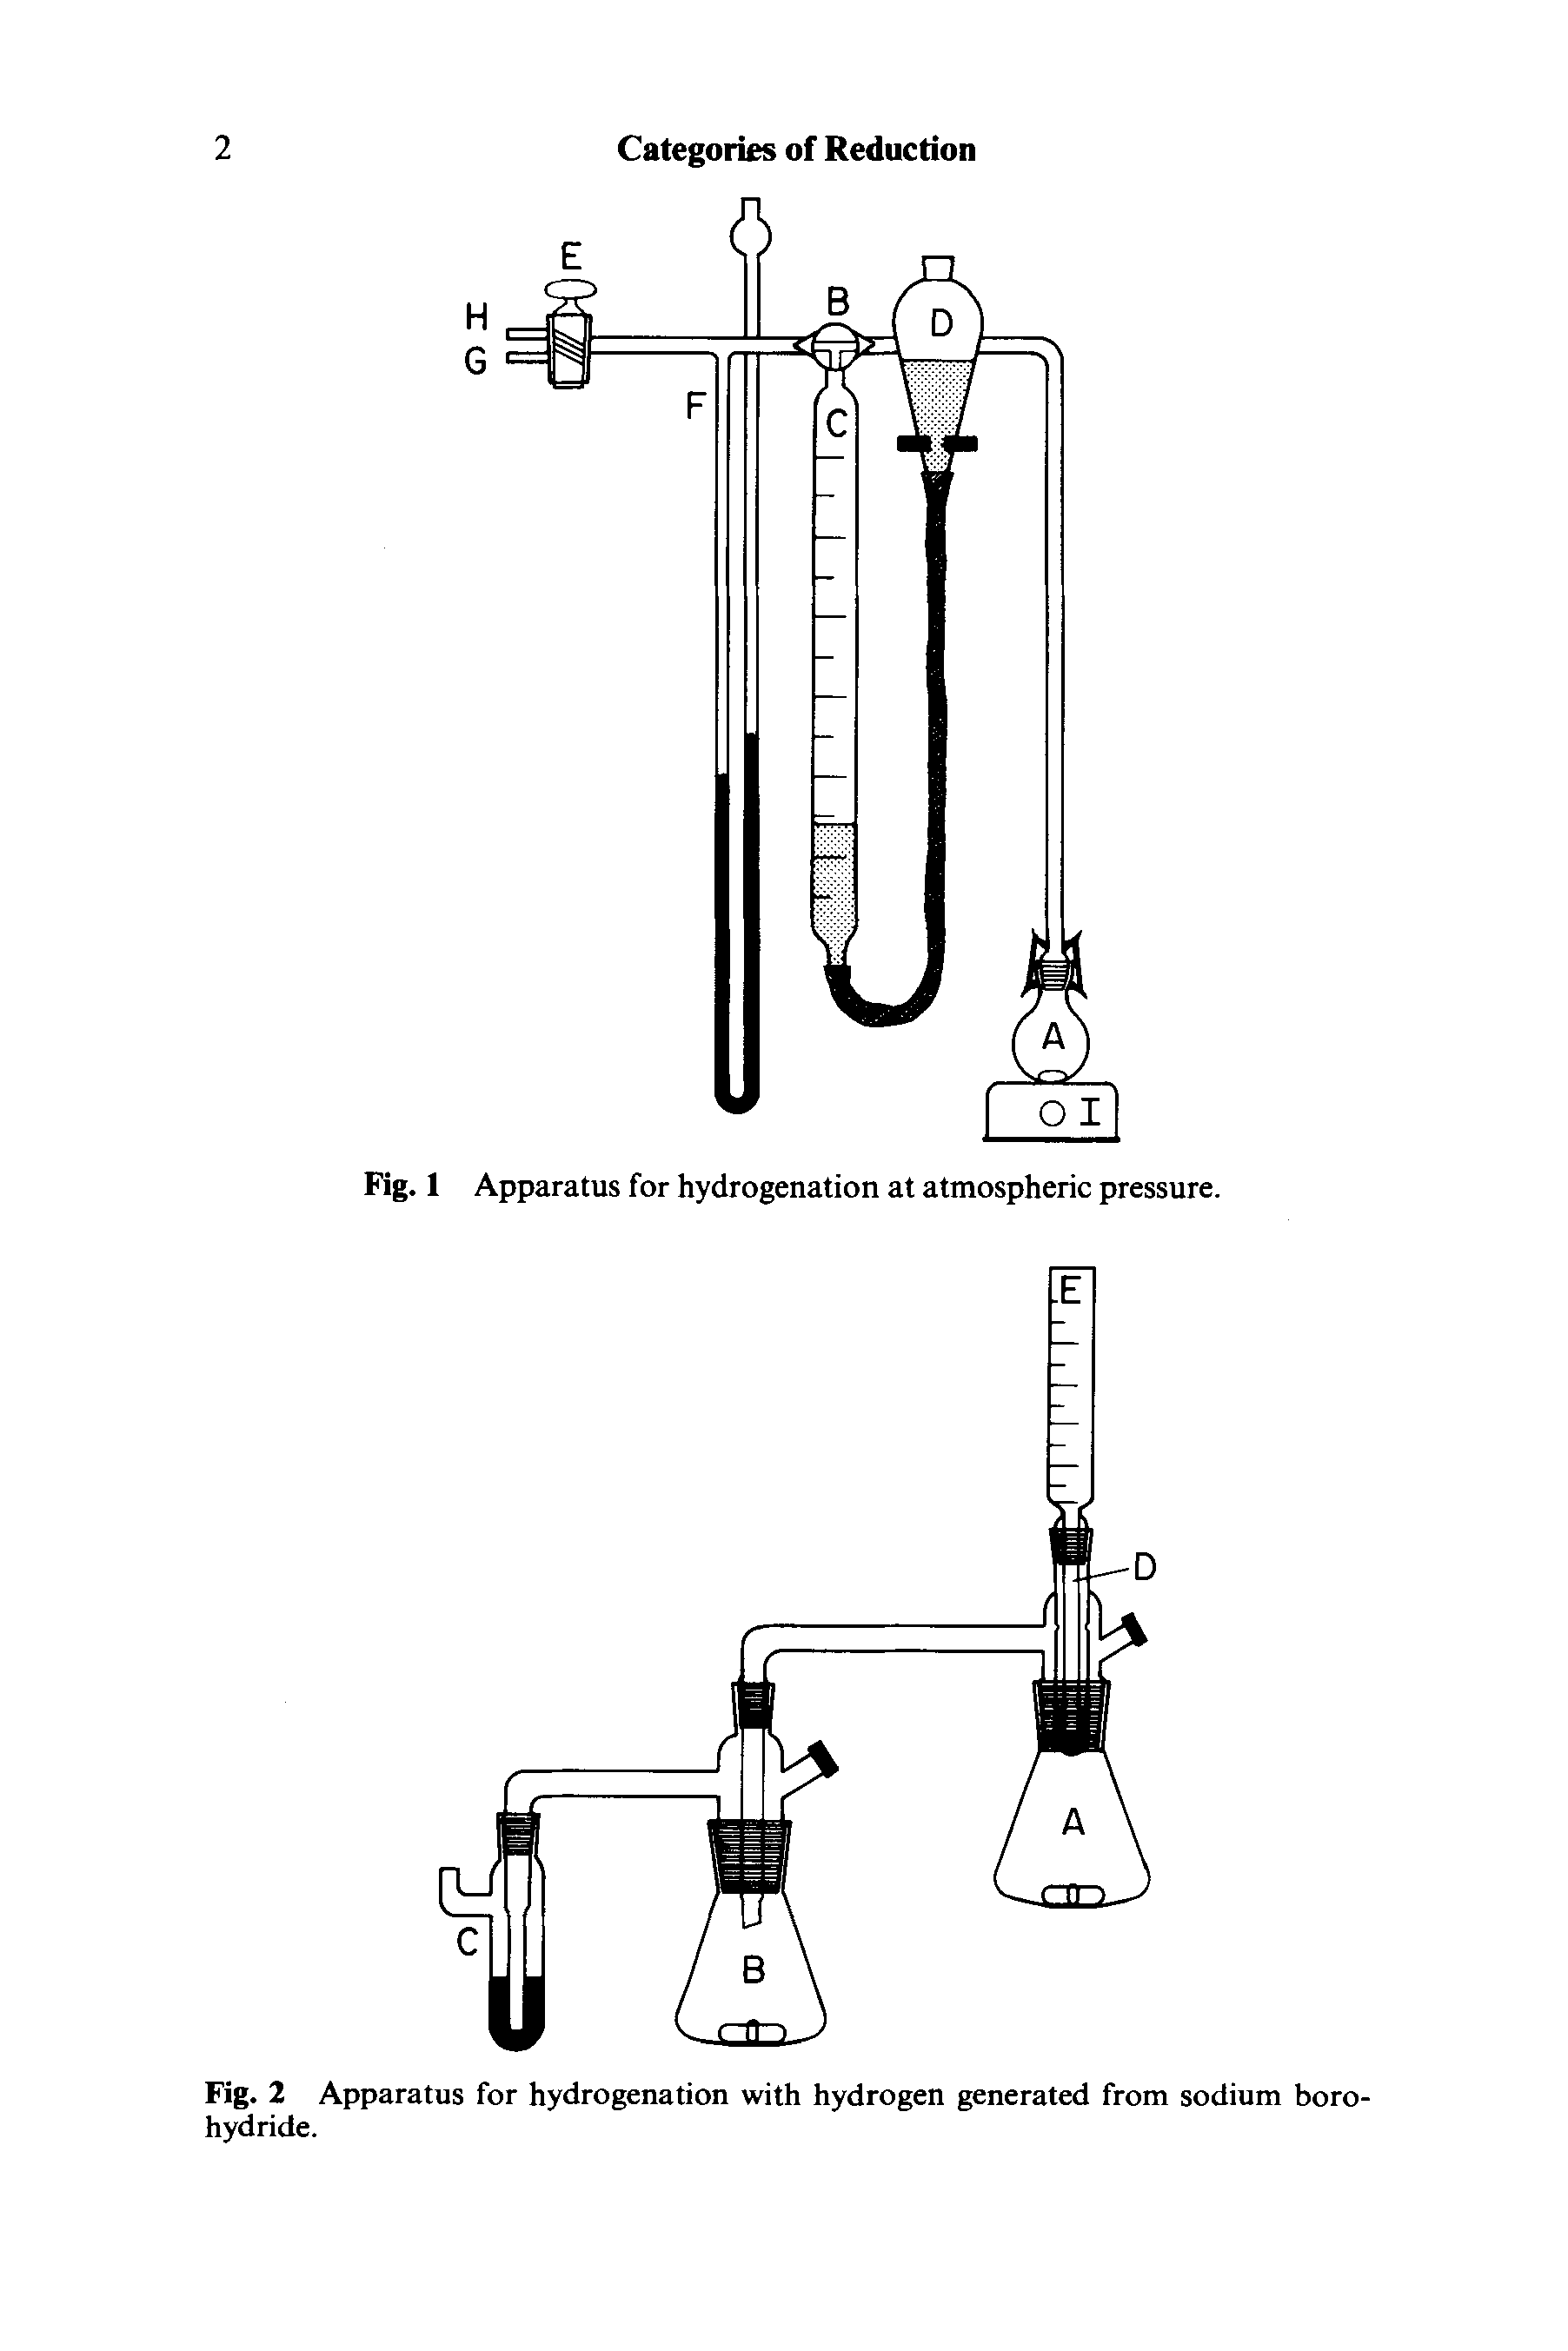 Fig. 2 Apparatus for hydrogenation with hydrogen generated from sodium boro-hydride.